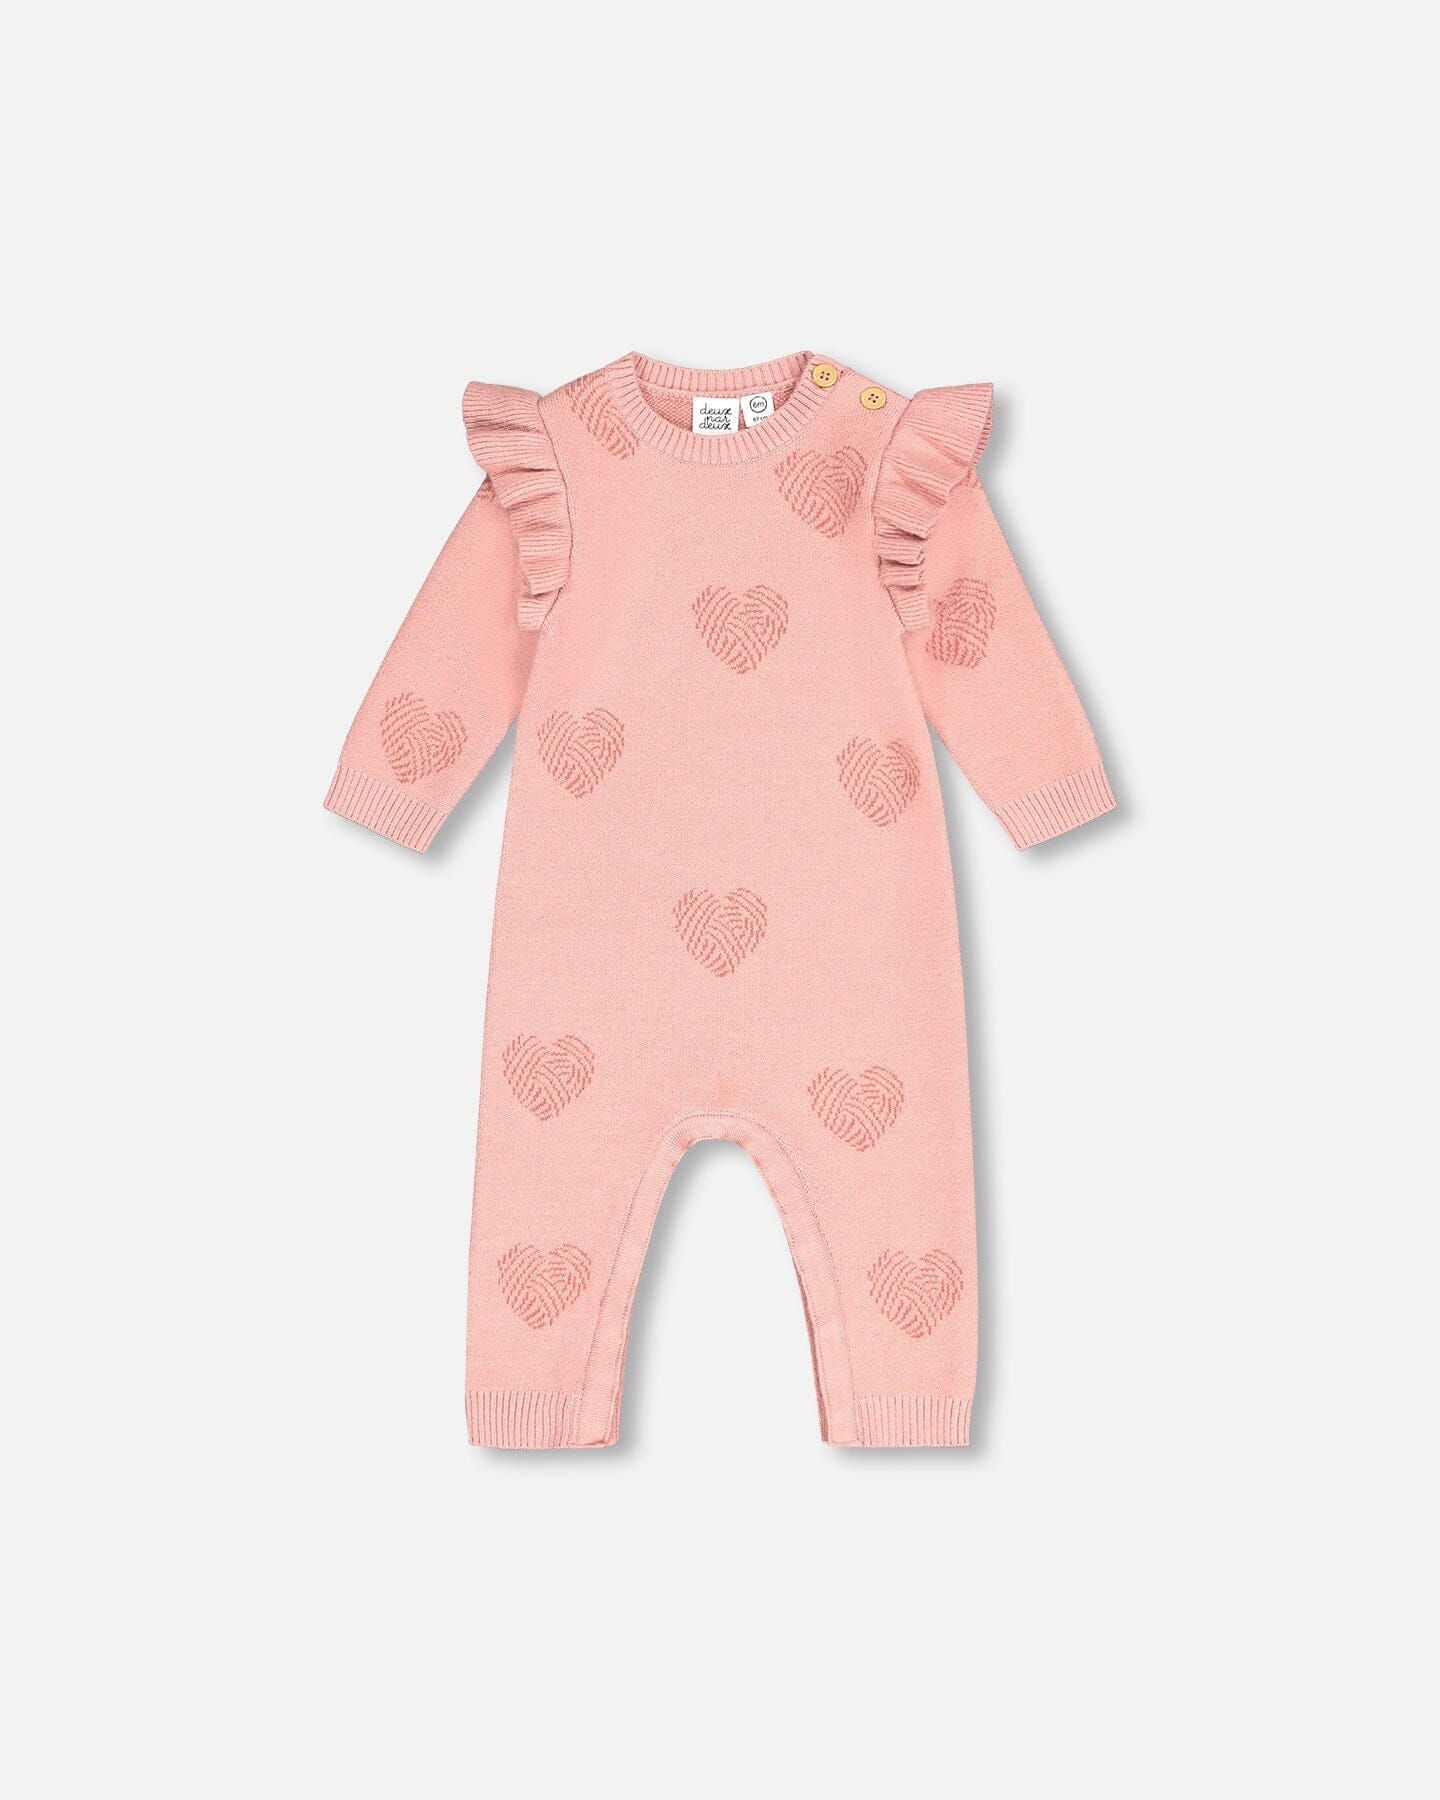 Knitted Jumpsuit With Jacquard Powder Pink Little Heart Of Wool - F20BT41_622